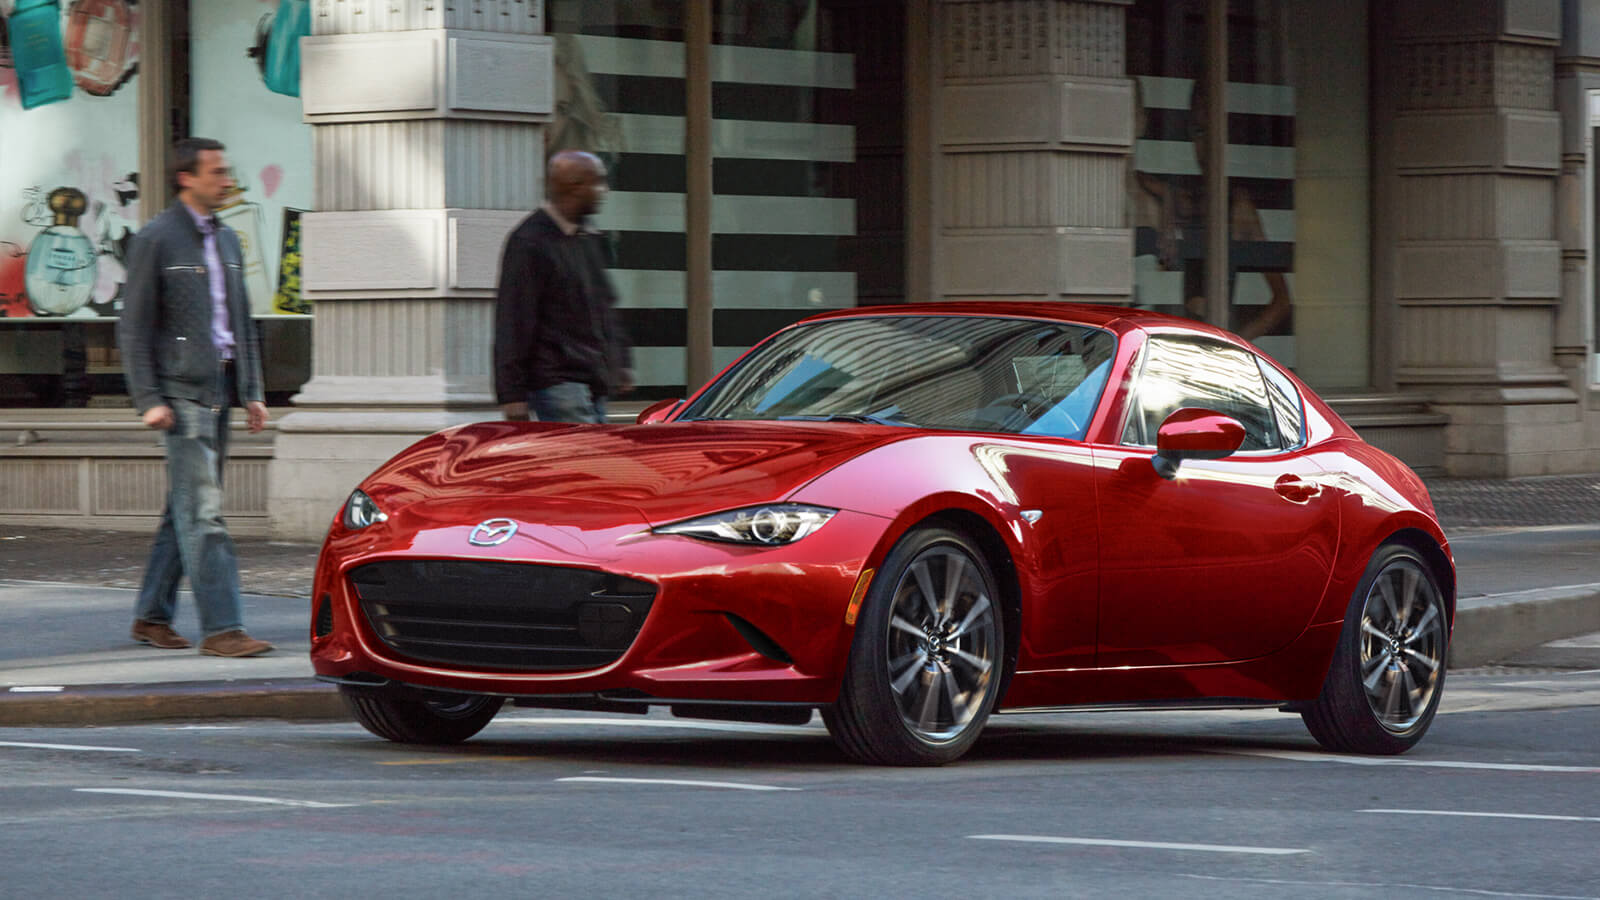 Soul Red Crystal Metallic MX-5 RF with the top up pulls away from city crosswalk, pedestrians wait to cross on the corner in the background.